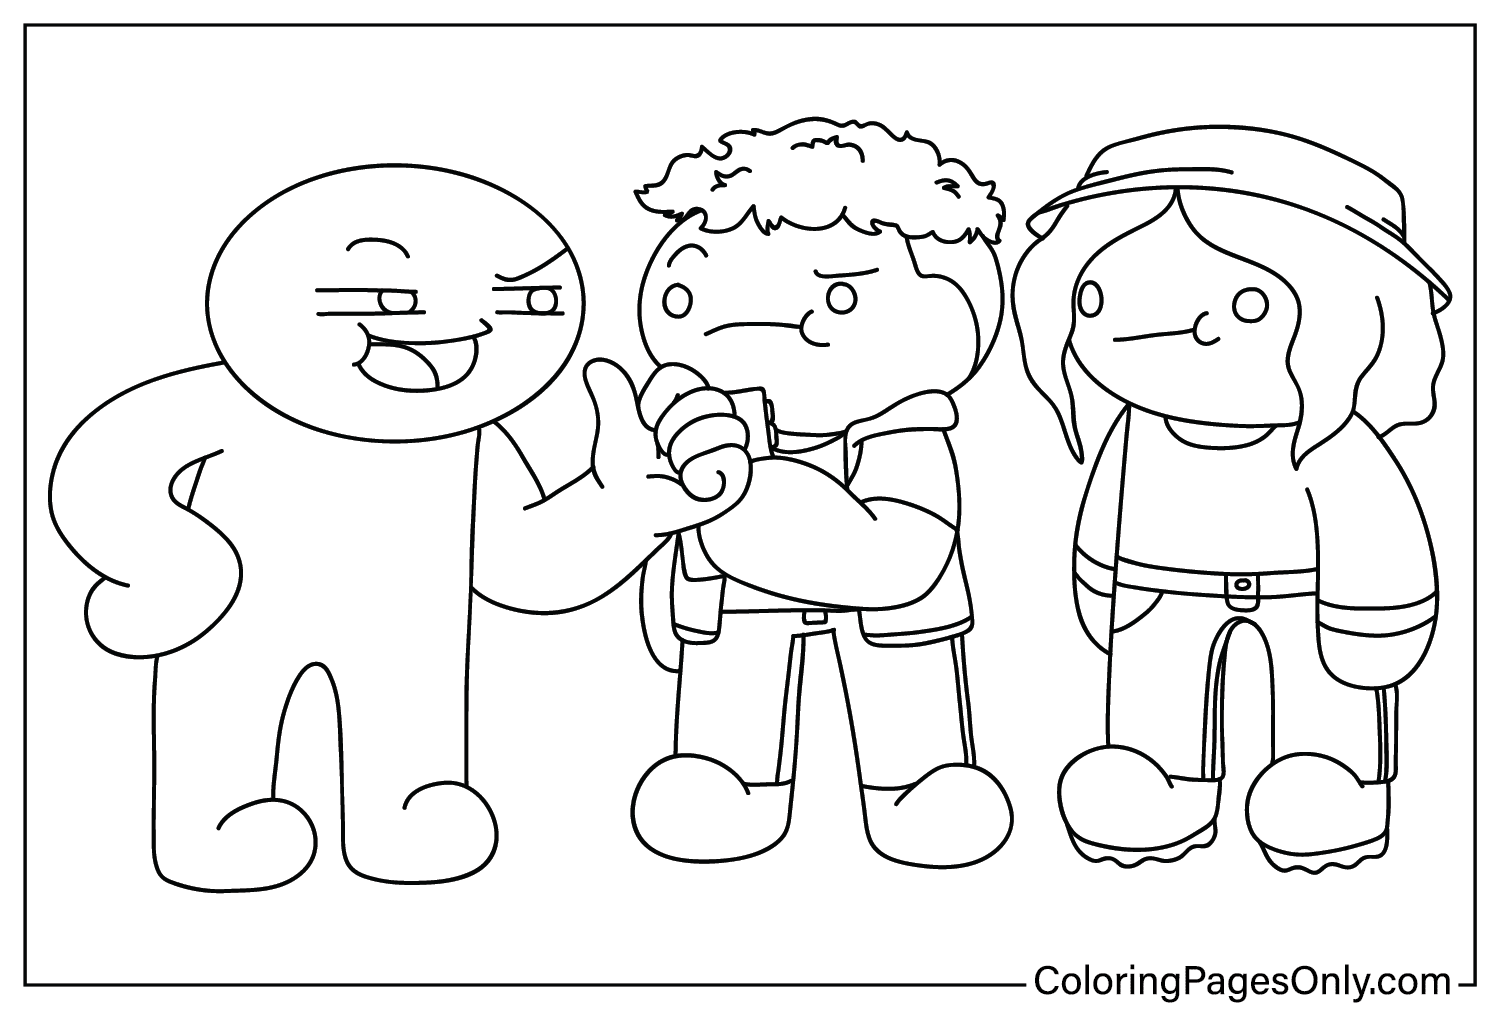 TheOdd1sOut Coloring Page PNG from TheOdd1sOut